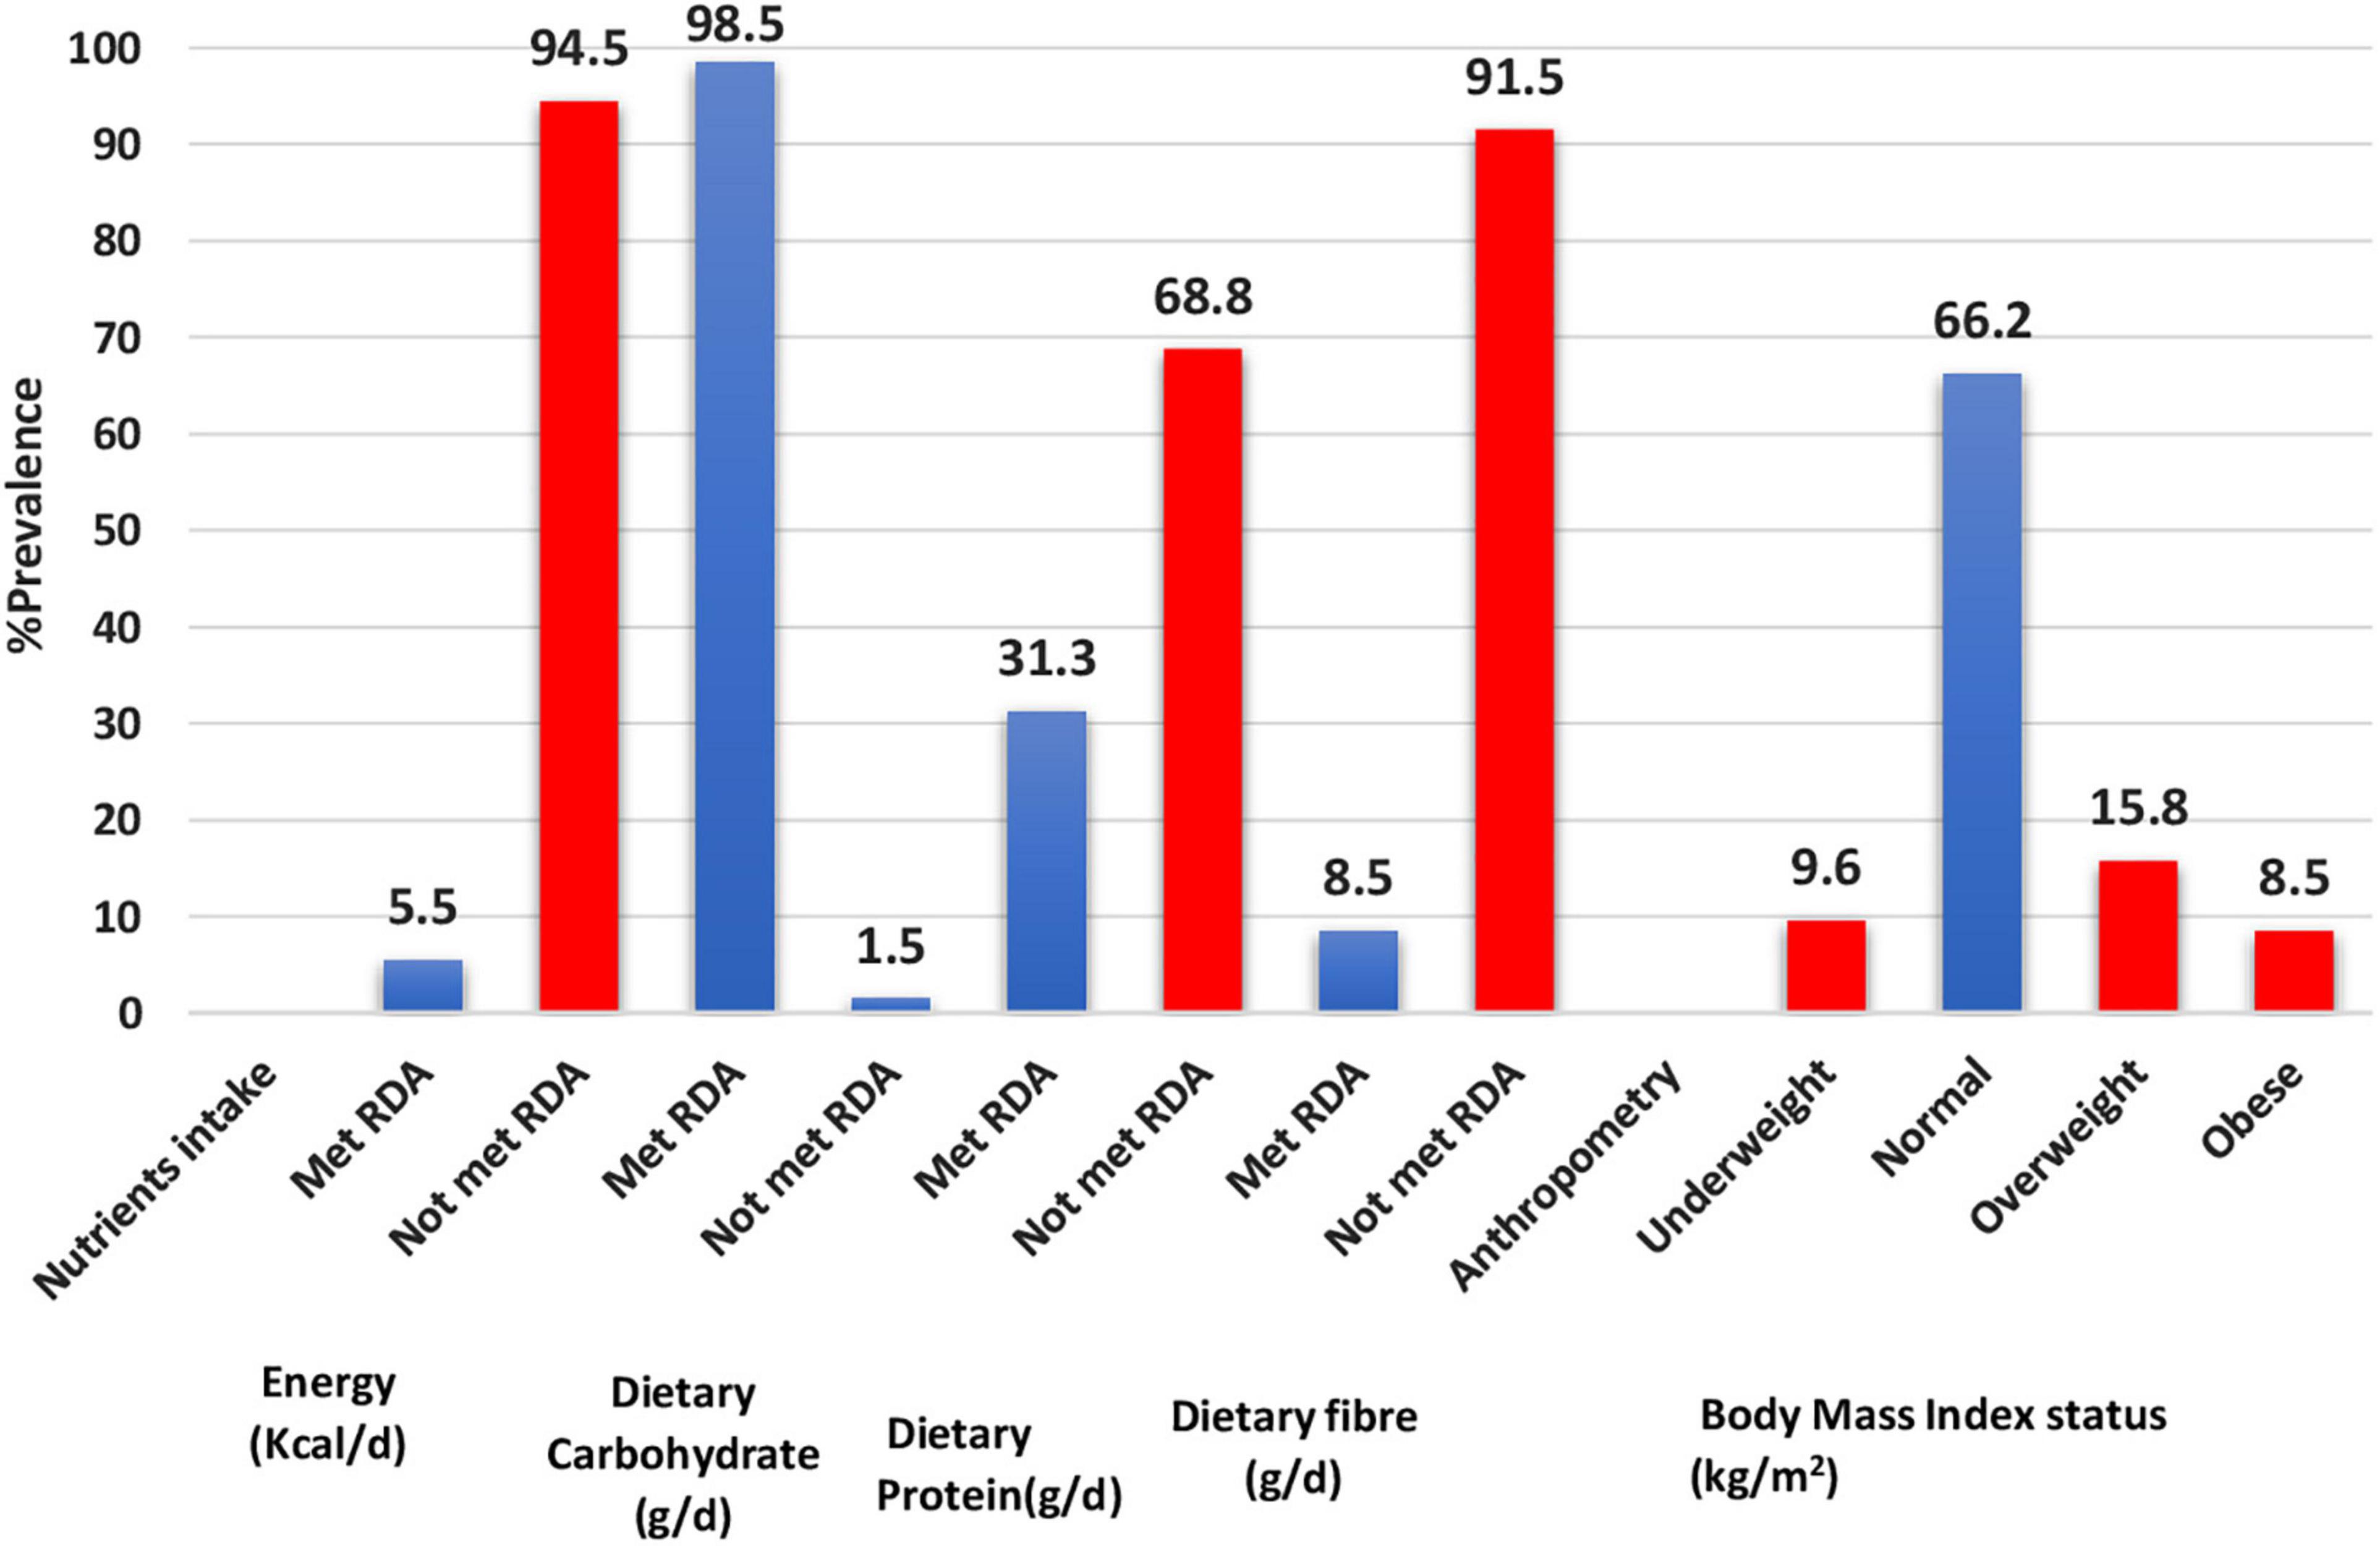 Comparison of overweight and obesity prevalence by population density